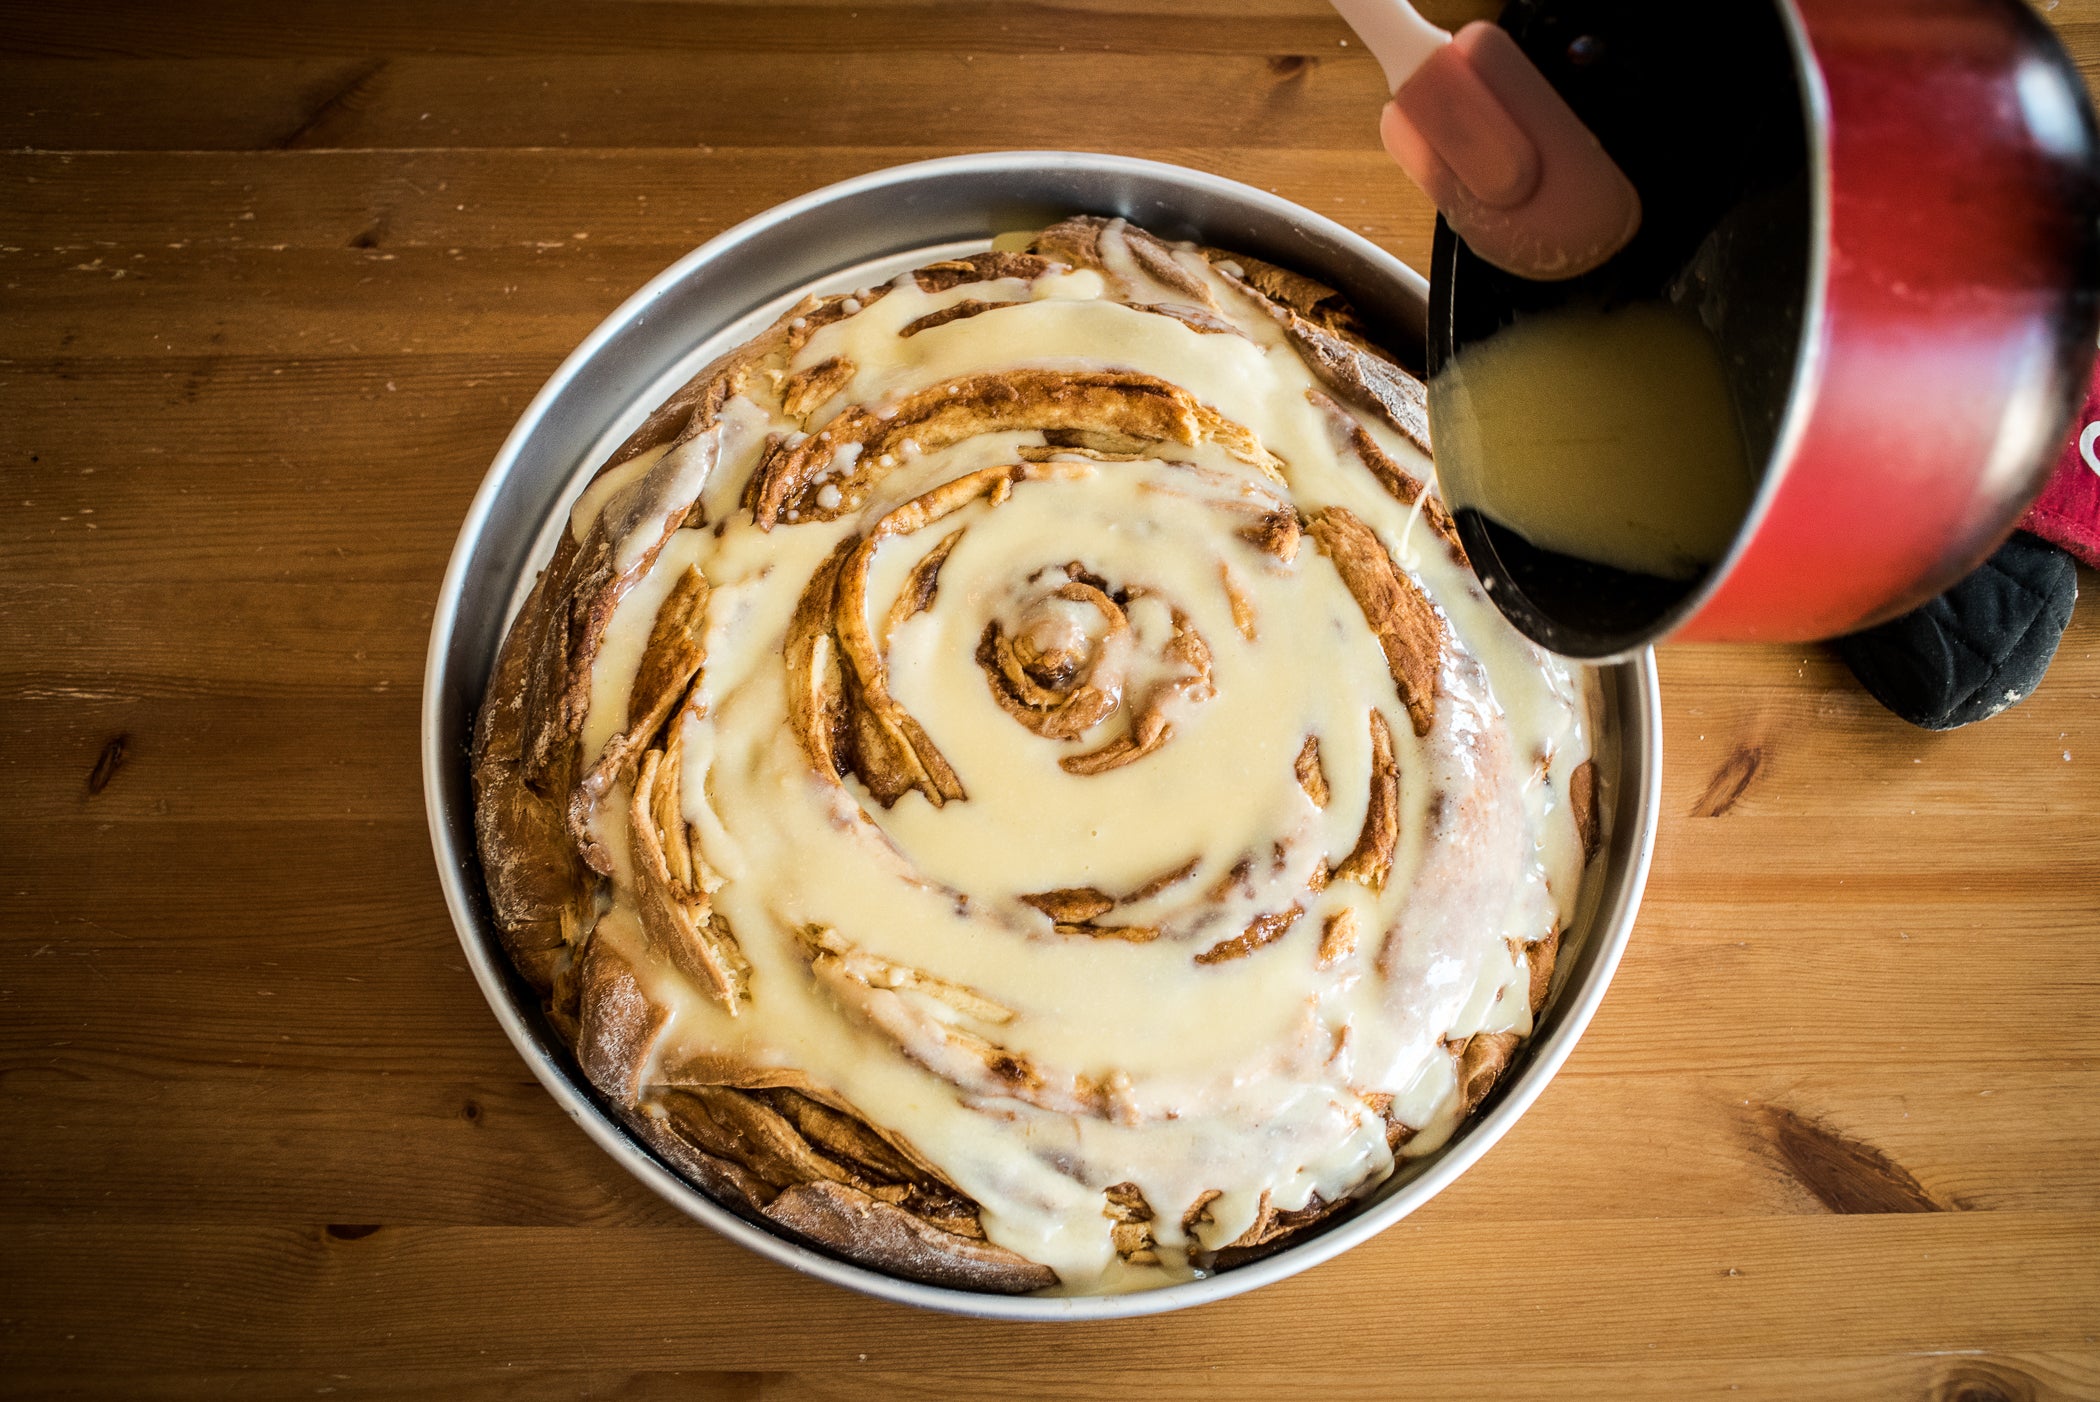 What Is the Largest Cinnamon Roll You Can Make in a Standard-Size Oven?